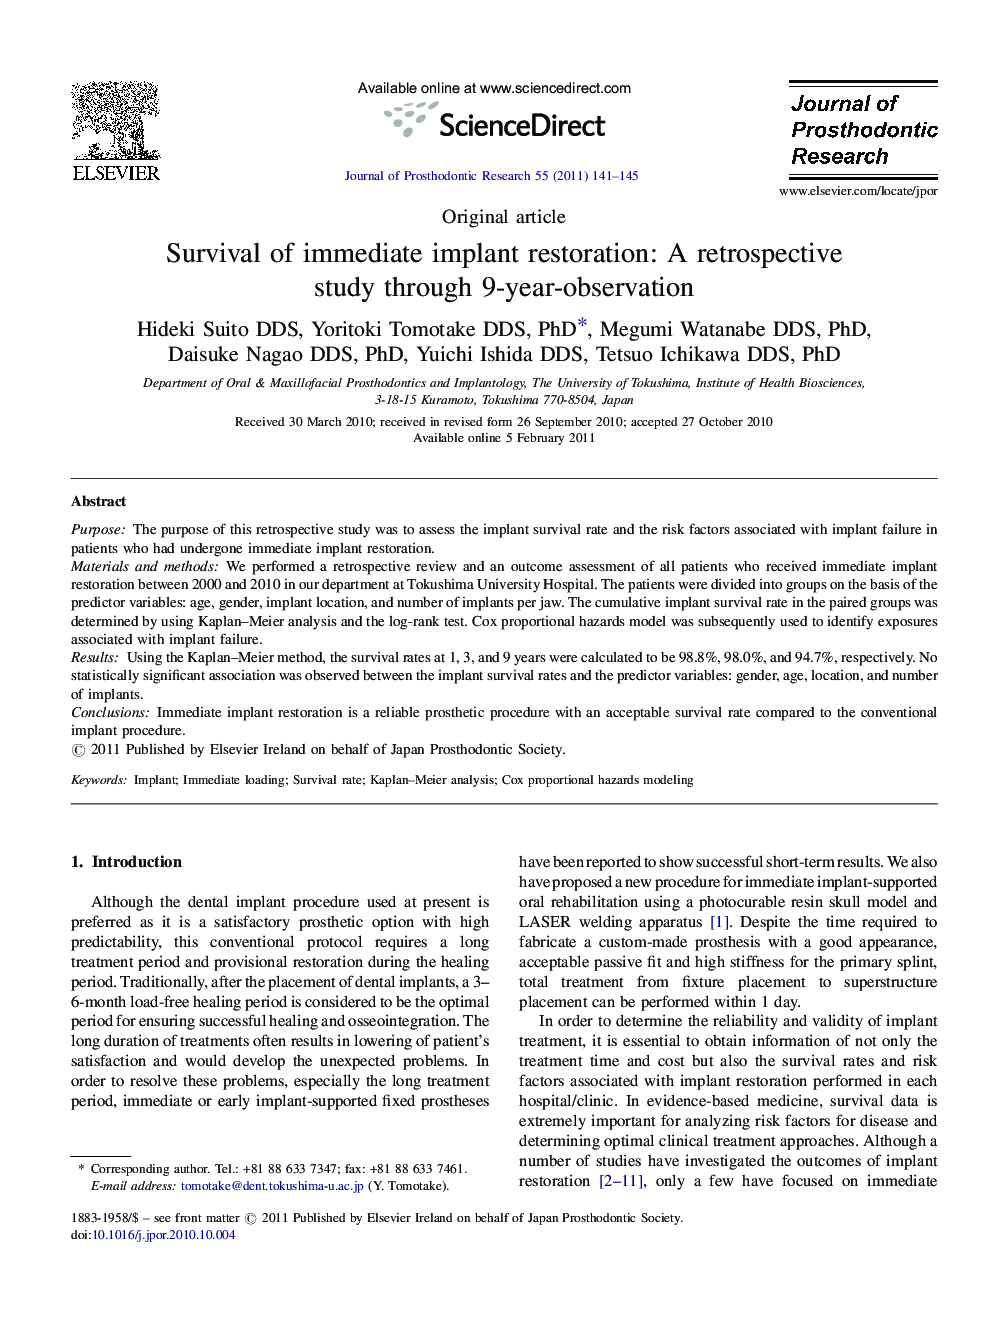 Survival of immediate implant restoration: A retrospective study through 9-year-observation